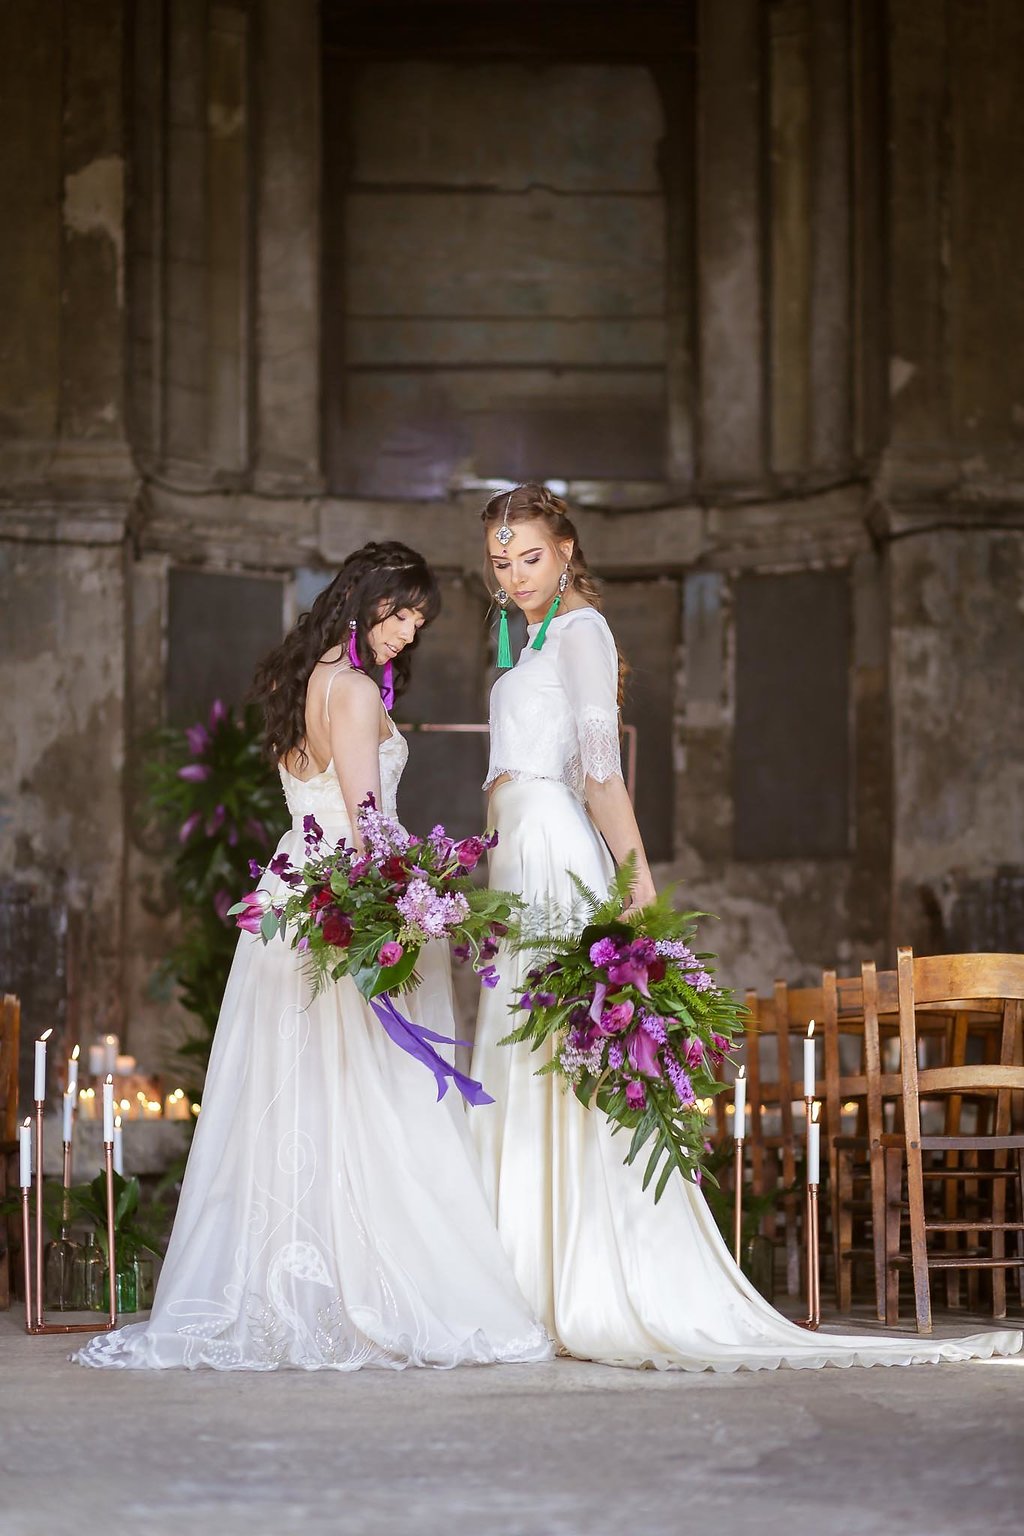 Rock the Purple Love - Colourful Wedding Inspiration for the Uber Cool, Modern Couple